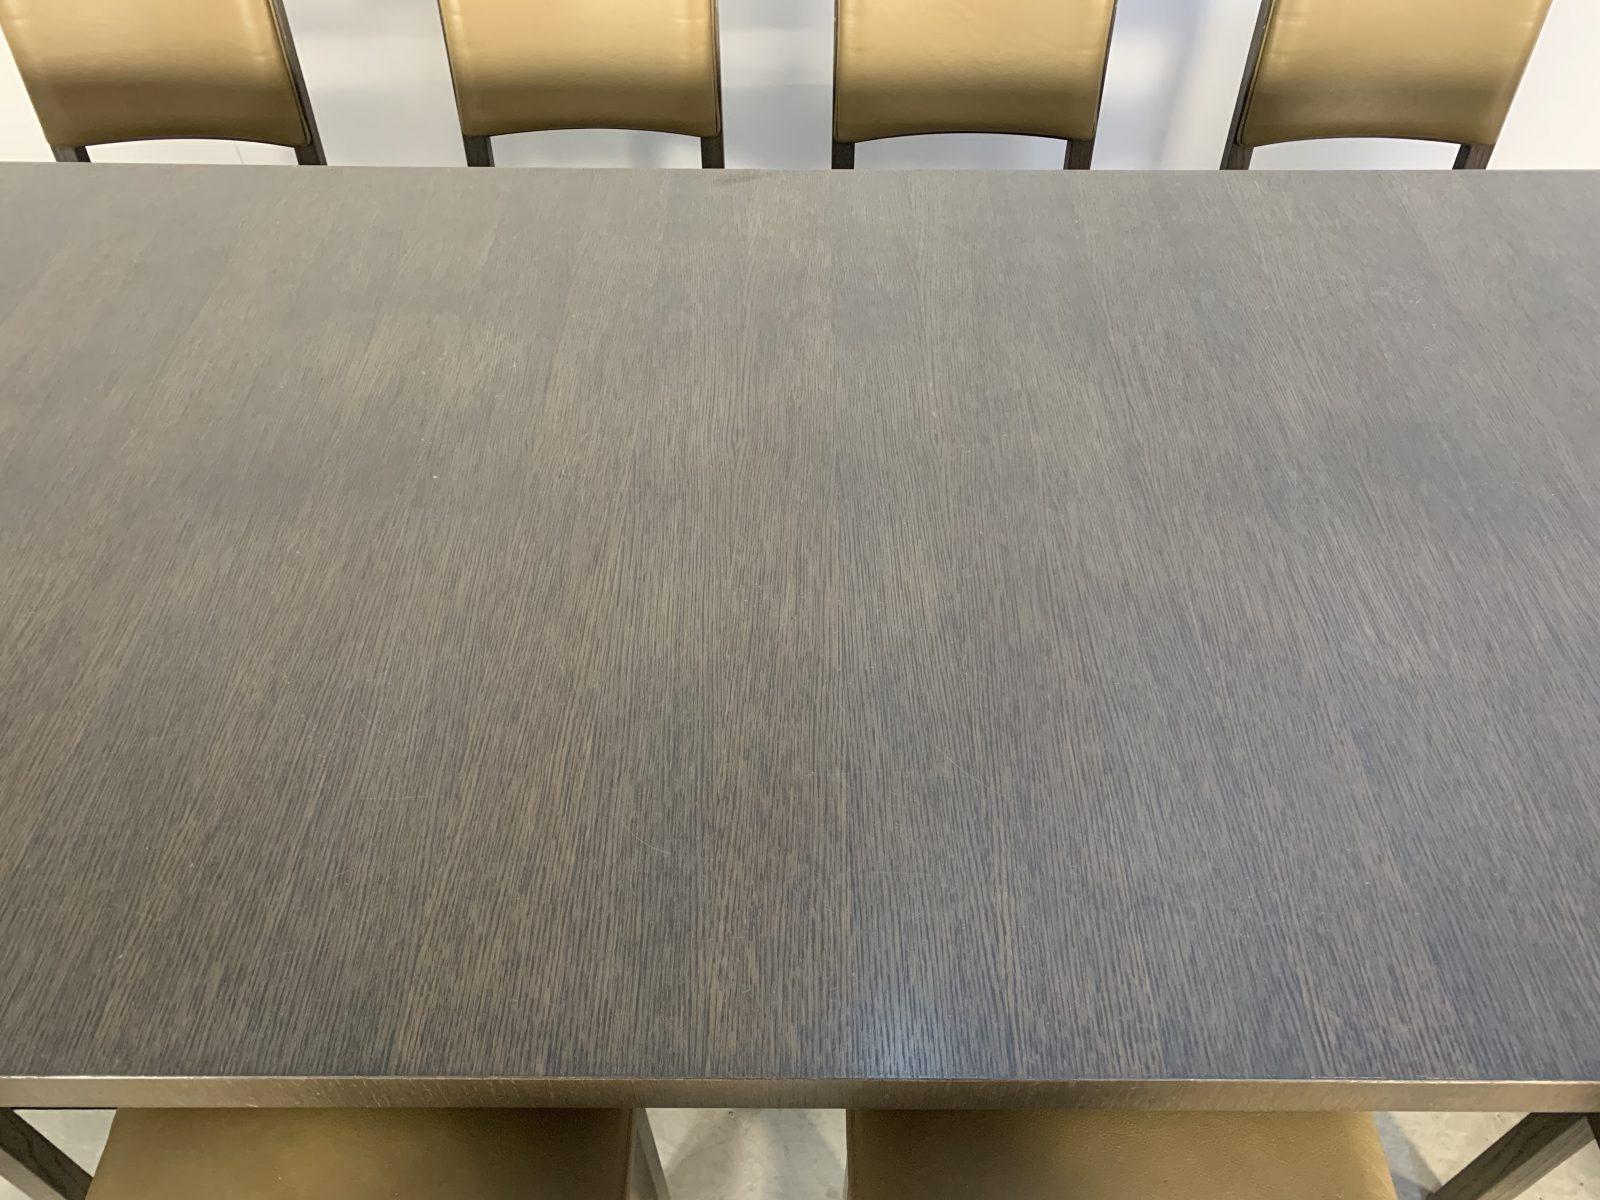 Leather Sublime Huge B&B Italia “Max” Dining Table & 10 “Maxalto” Dining Chairs in Grey For Sale